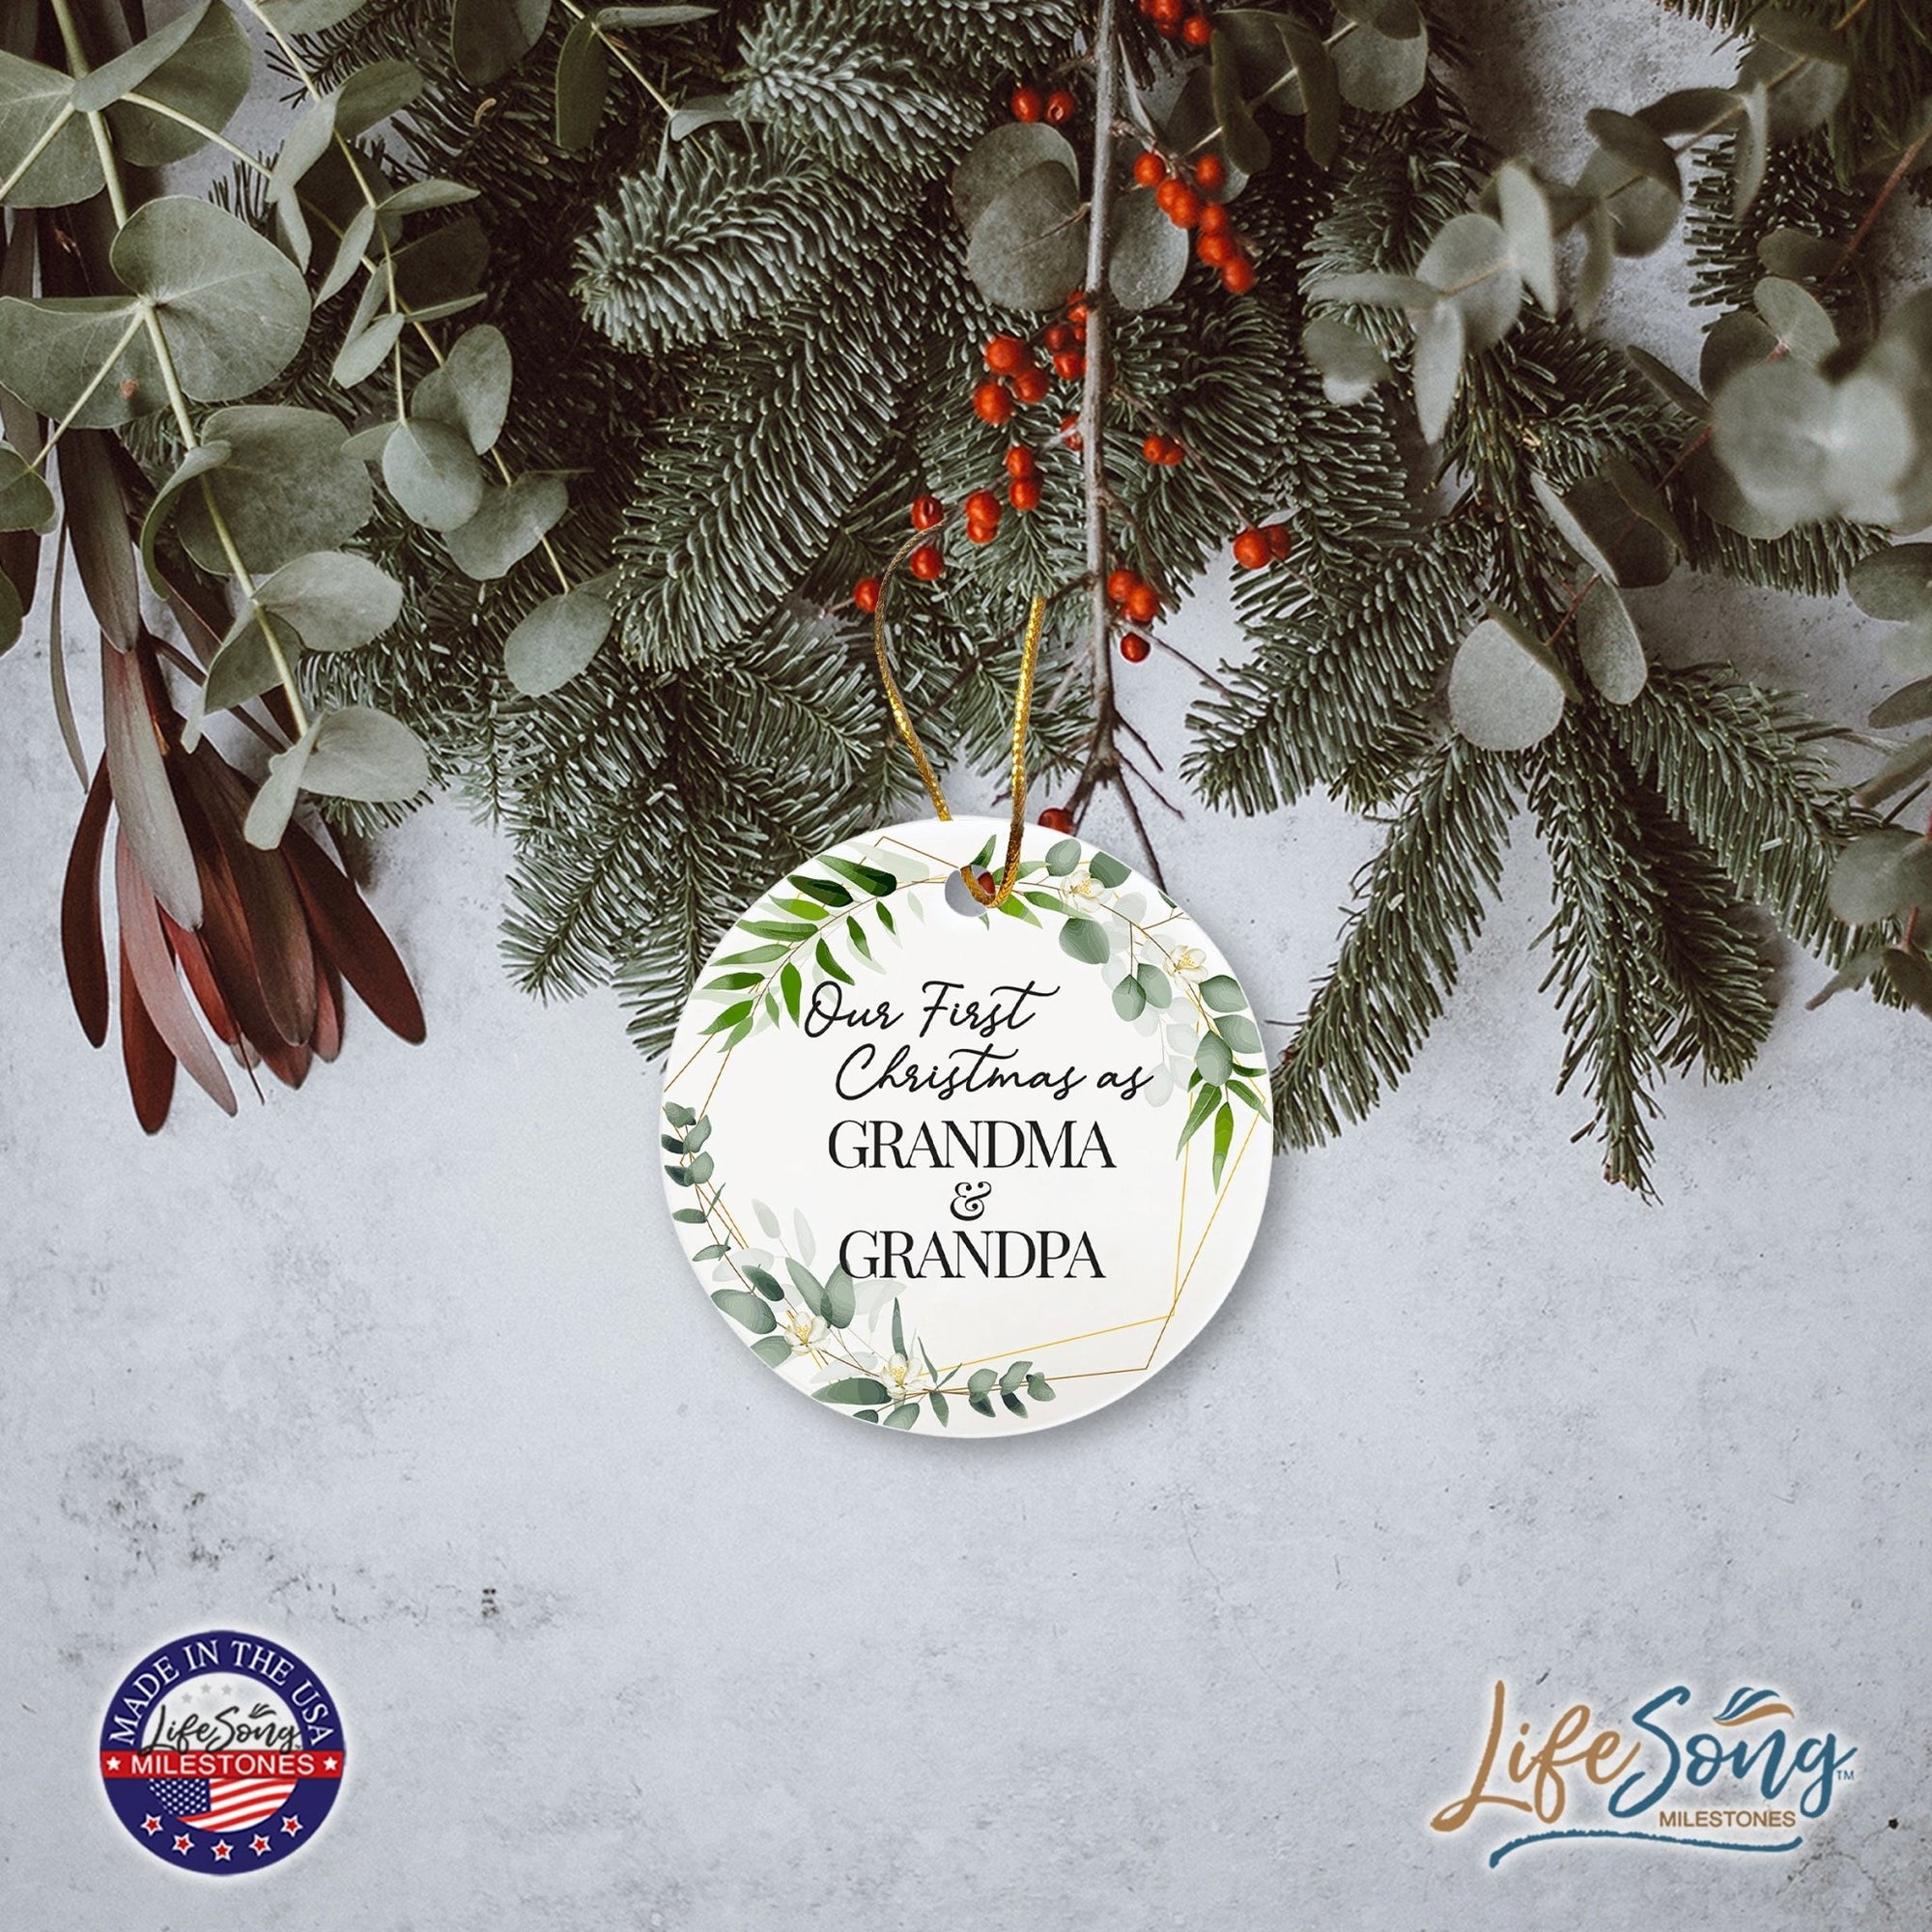 Inspiring 2.75in Christmas Ceramic White Round Ornament for Grandparents - Our First Christmas - LifeSong Milestones